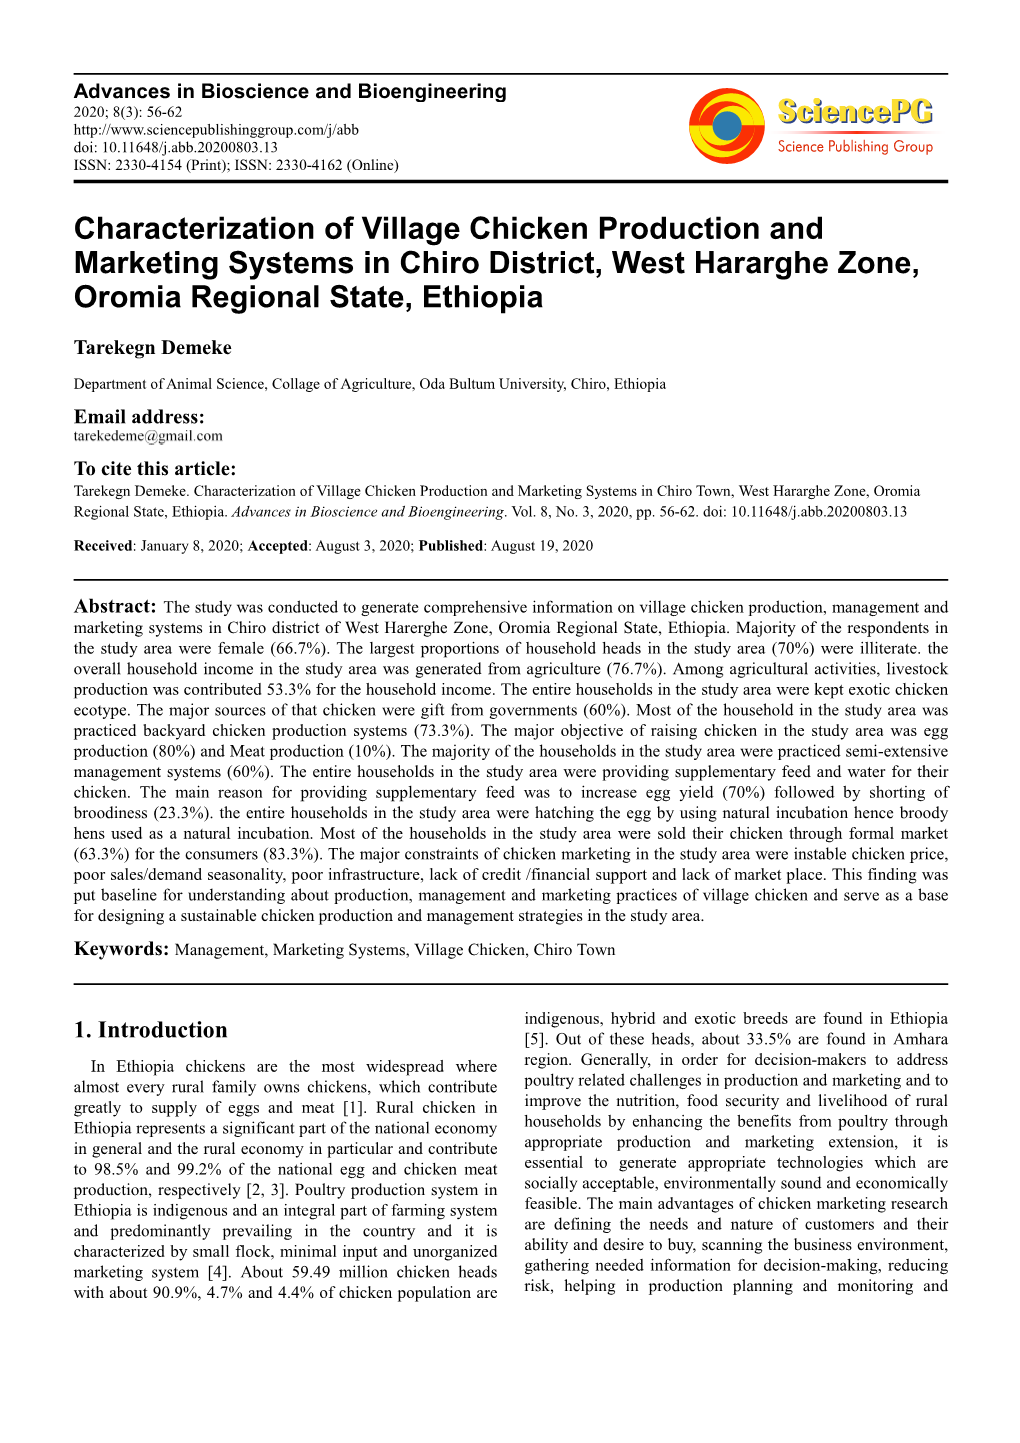 Characterization of Village Chicken Production and Marketing Systems in Chiro District, West Hararghe Zone, Oromia Regional State, Ethiopia